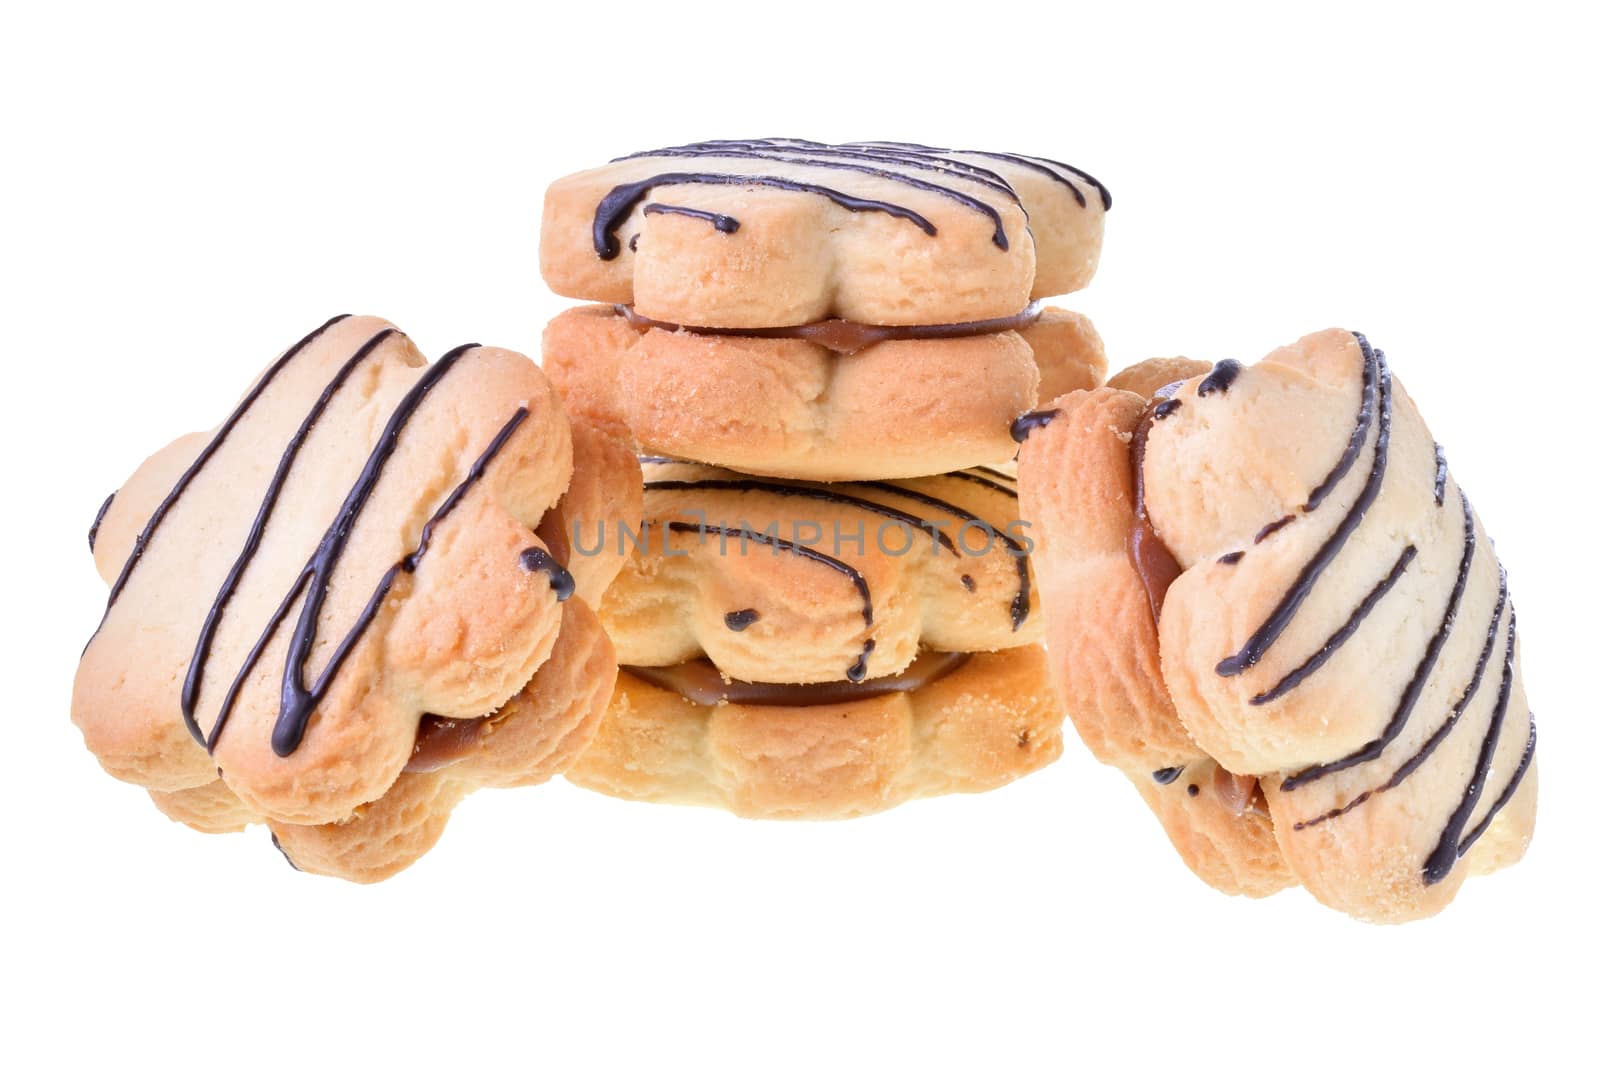 homemade cookies sandwich with chocolate and custard isolated on white background.